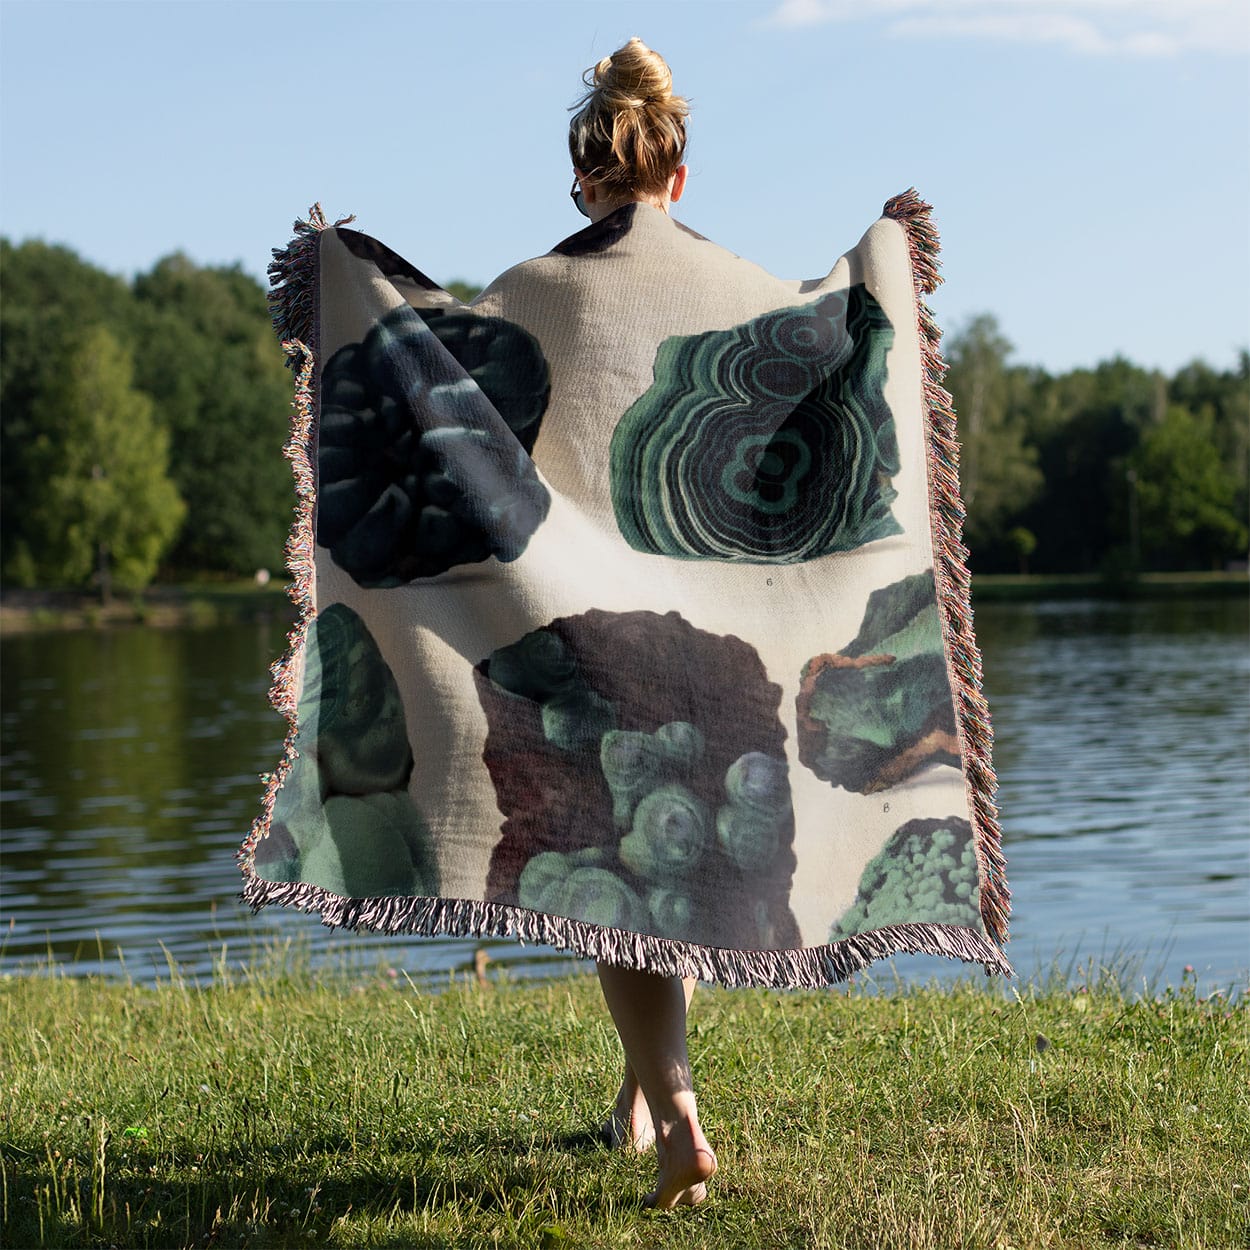 Dark Rocks and Jade Woven Blanket Held on a Woman's Back Outside